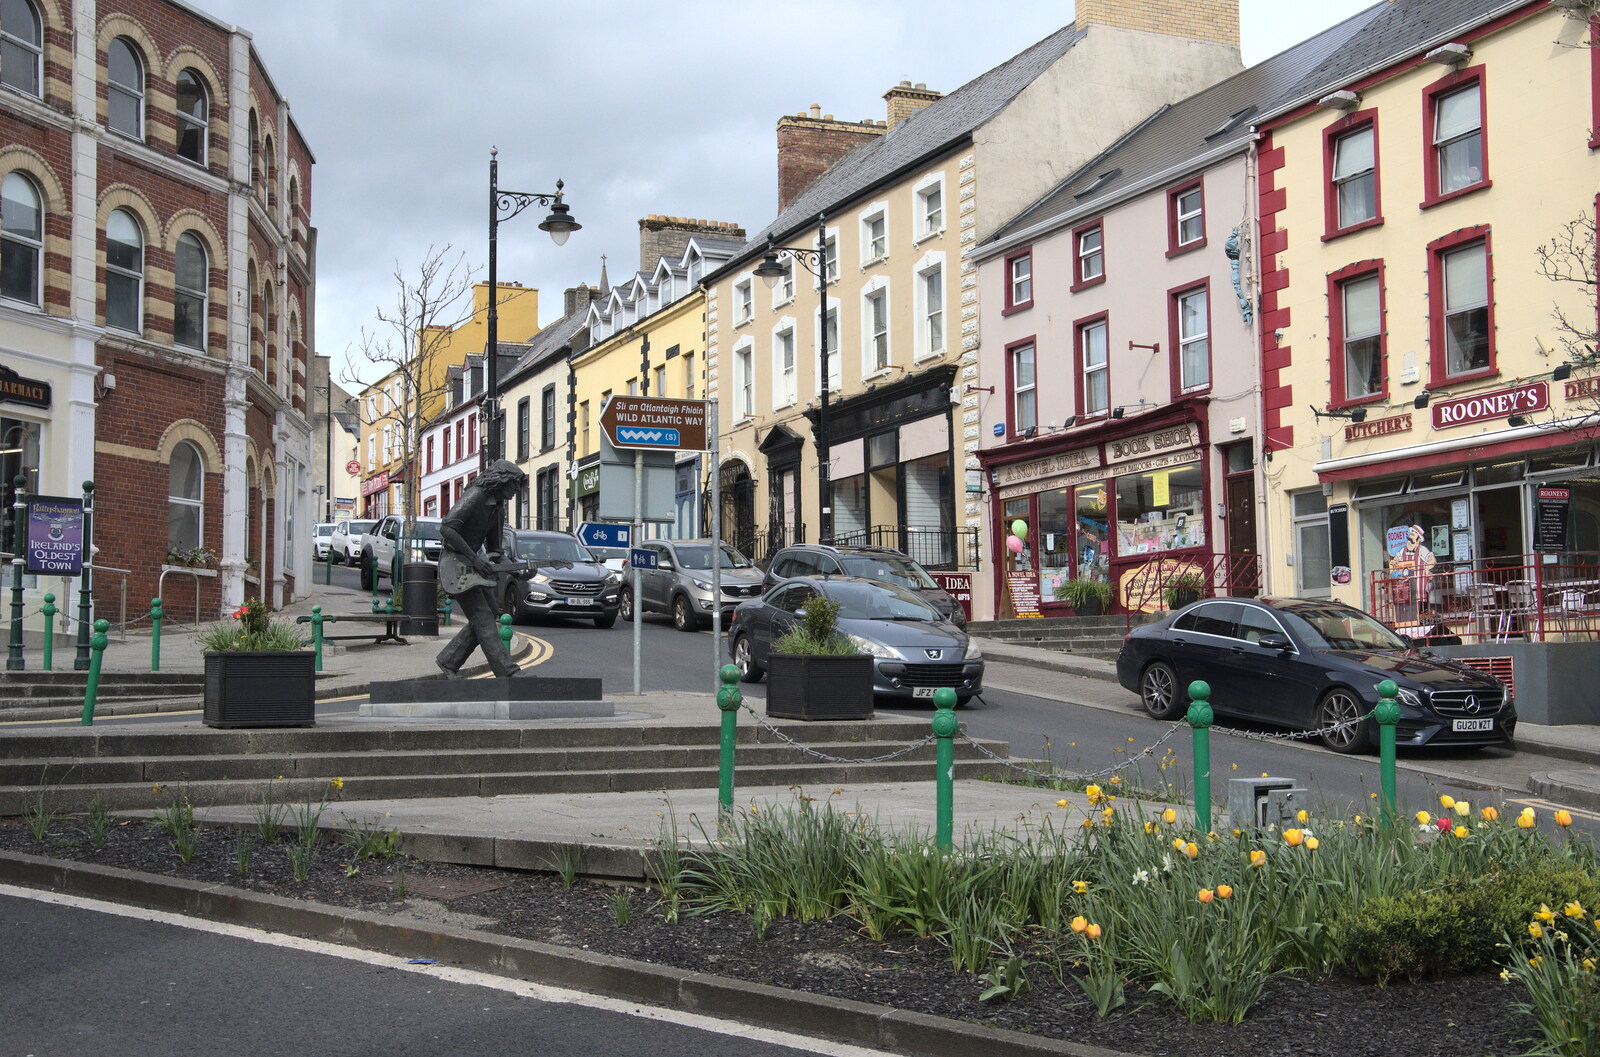 The Rory Gallagher statue in Ballyshannon from Manorhamilton and Bundoran, Leitrim and Donegal, Ireland - 16th April 2022